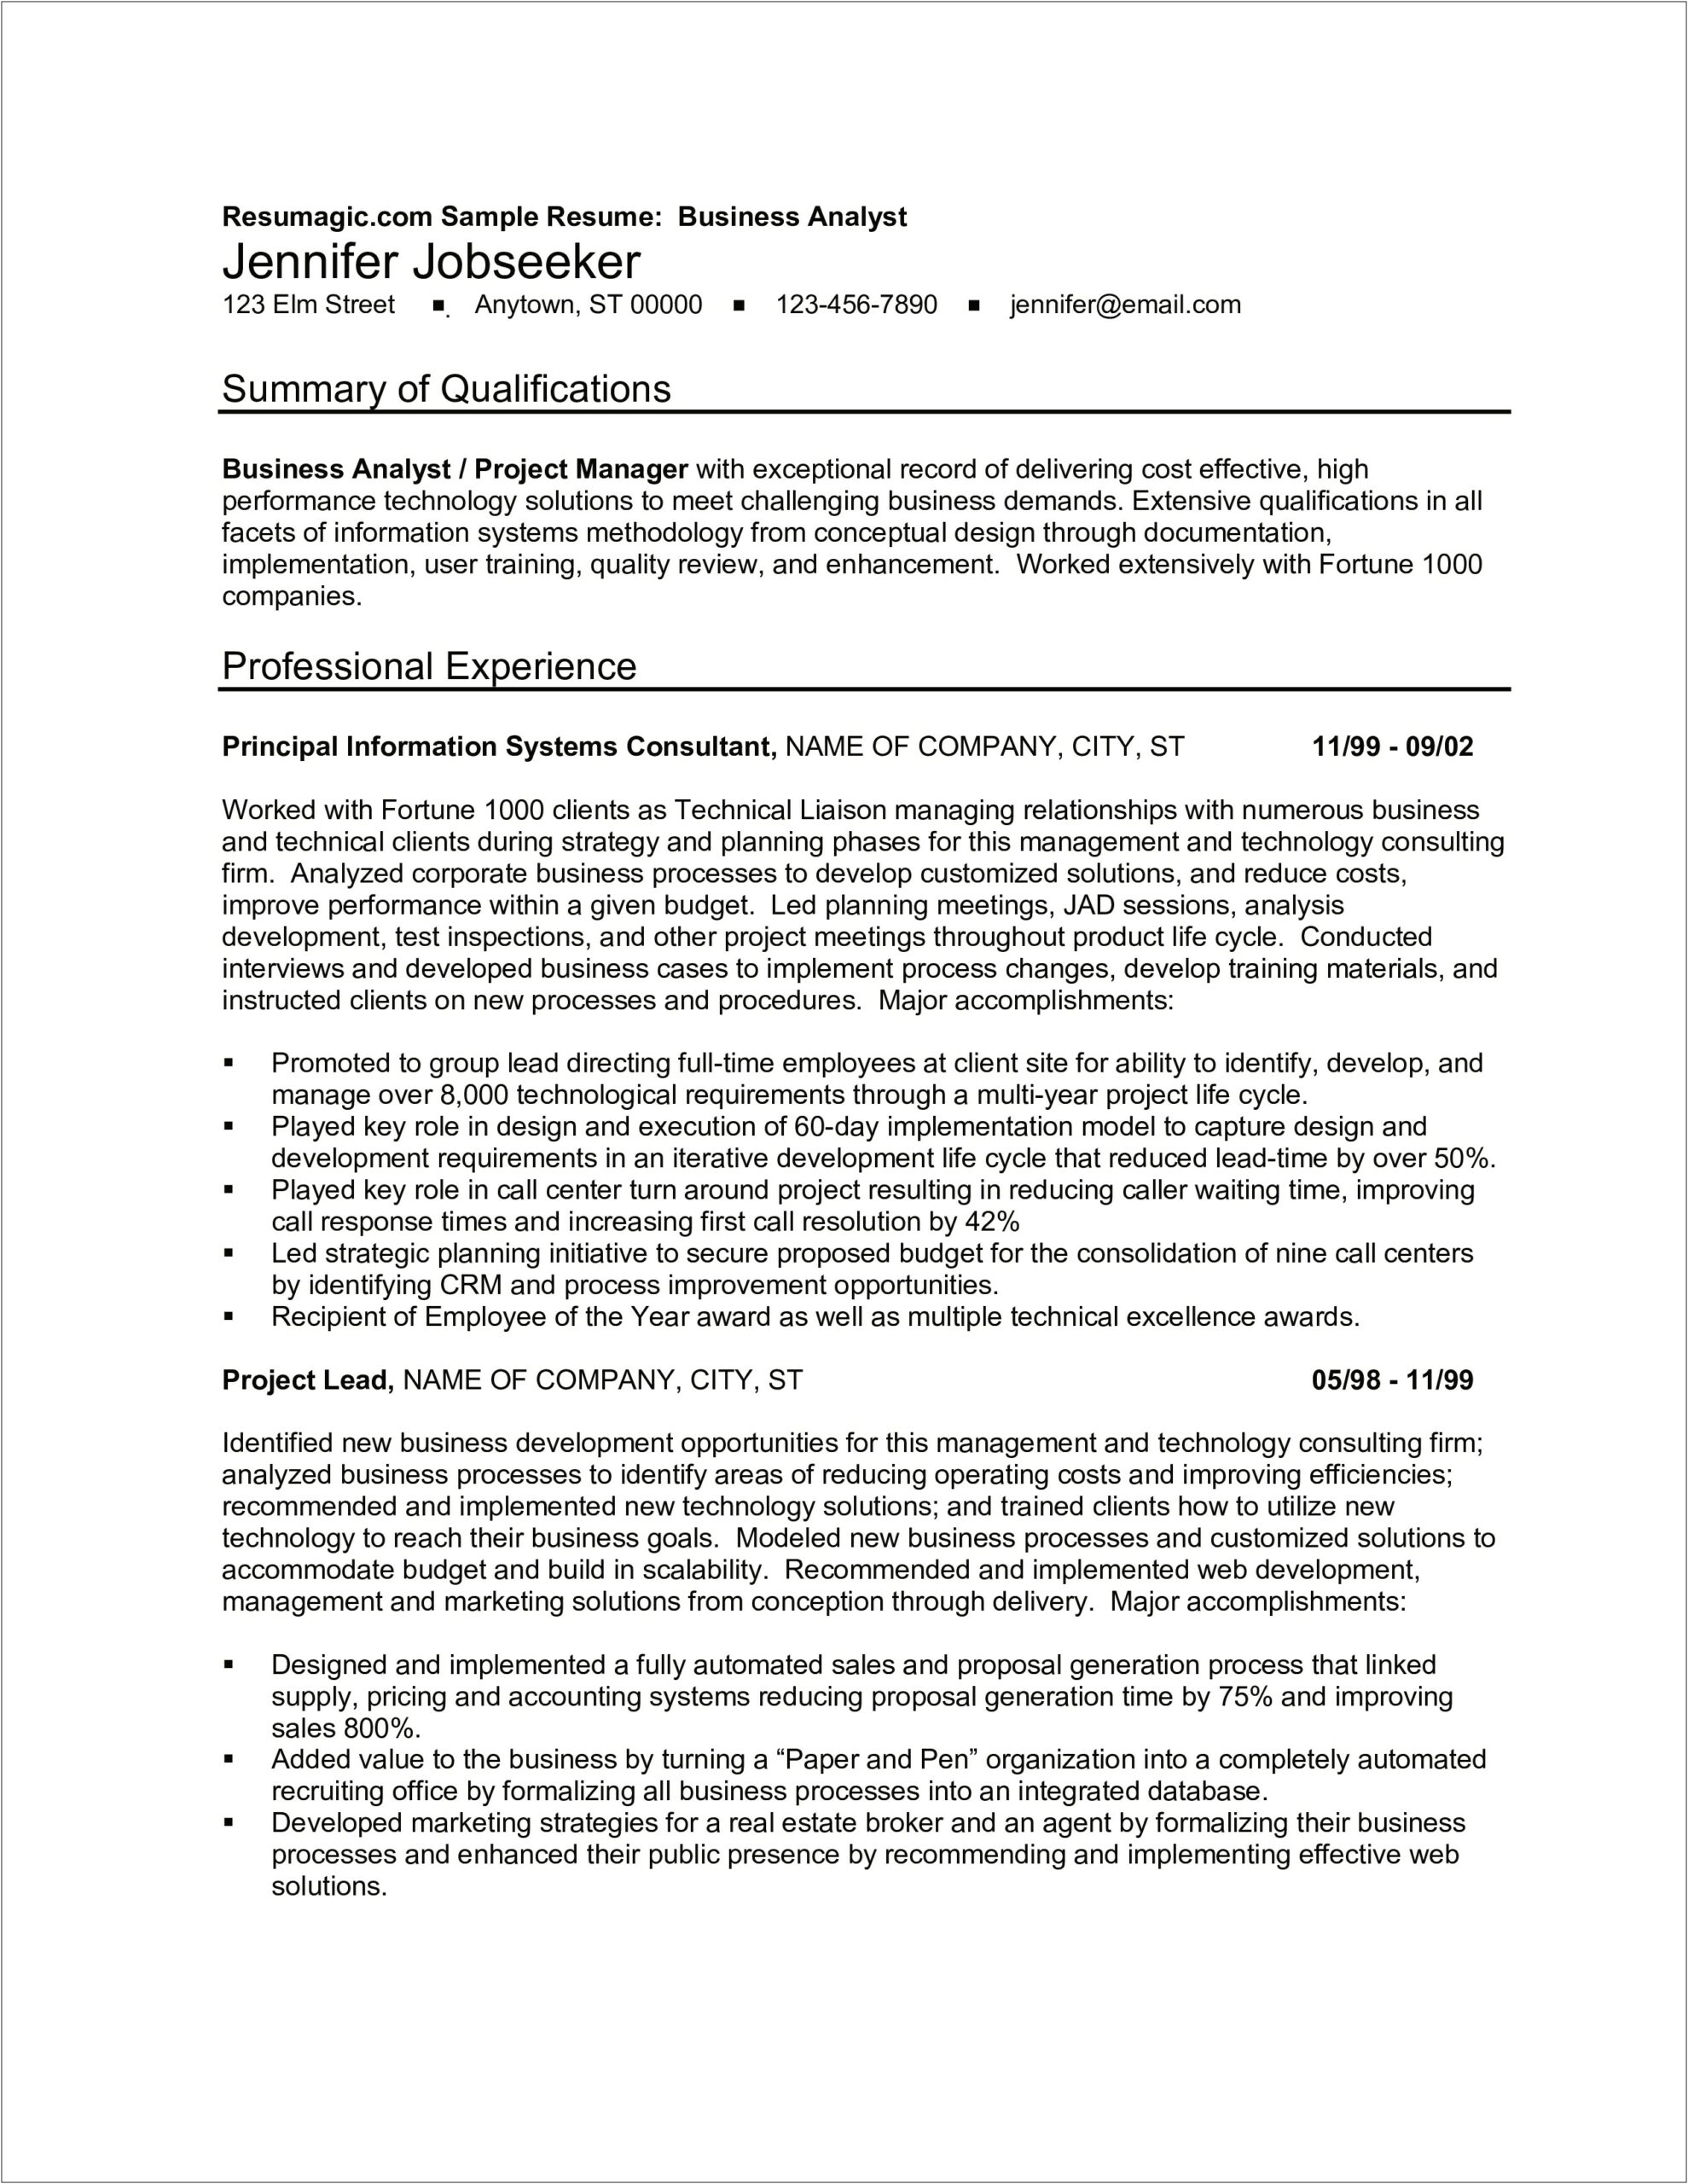 Resume Objective Information Technology Example